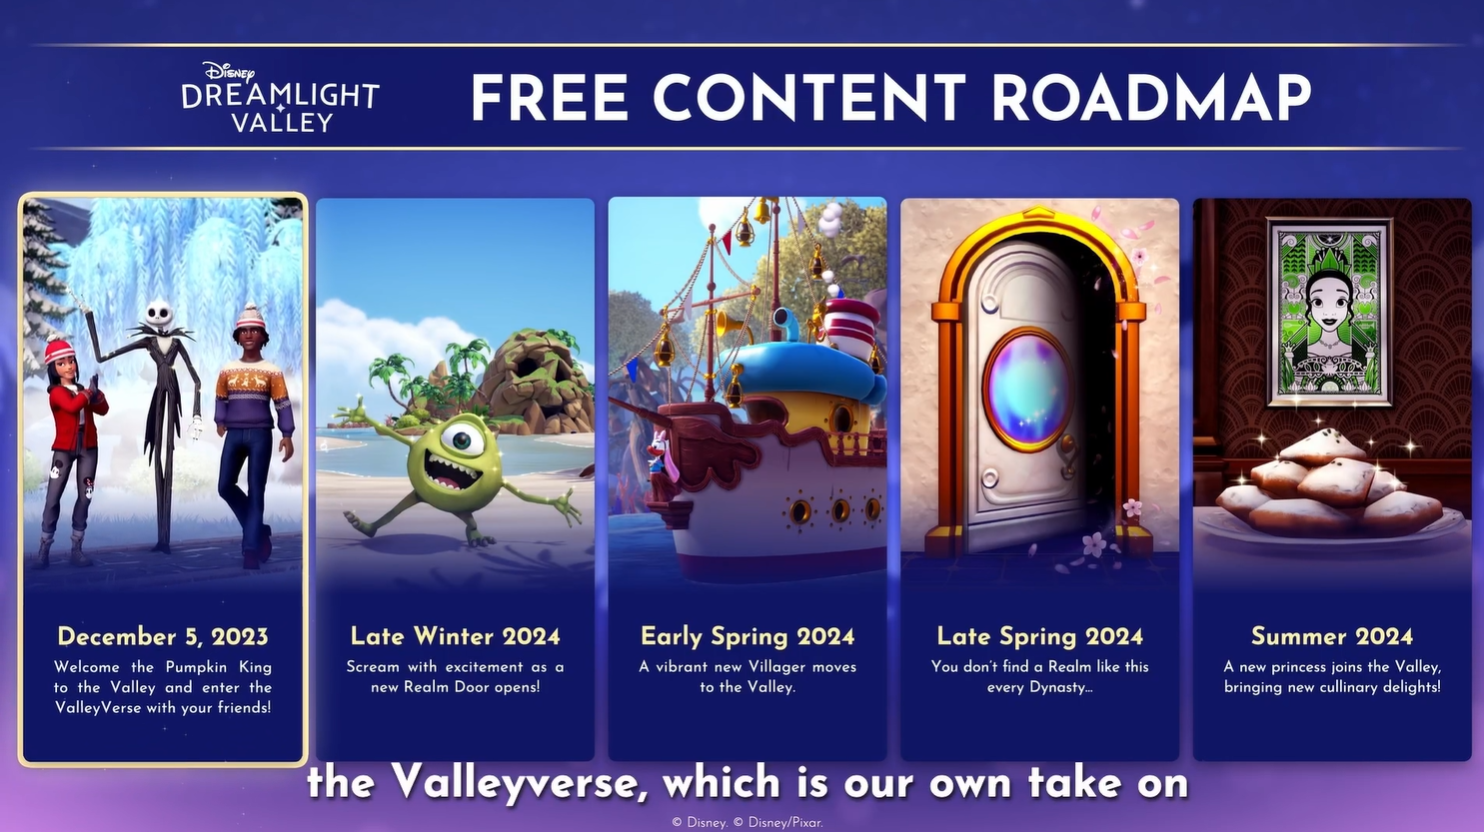 When Does Disney Dreamlight Valley Leave Early Access?